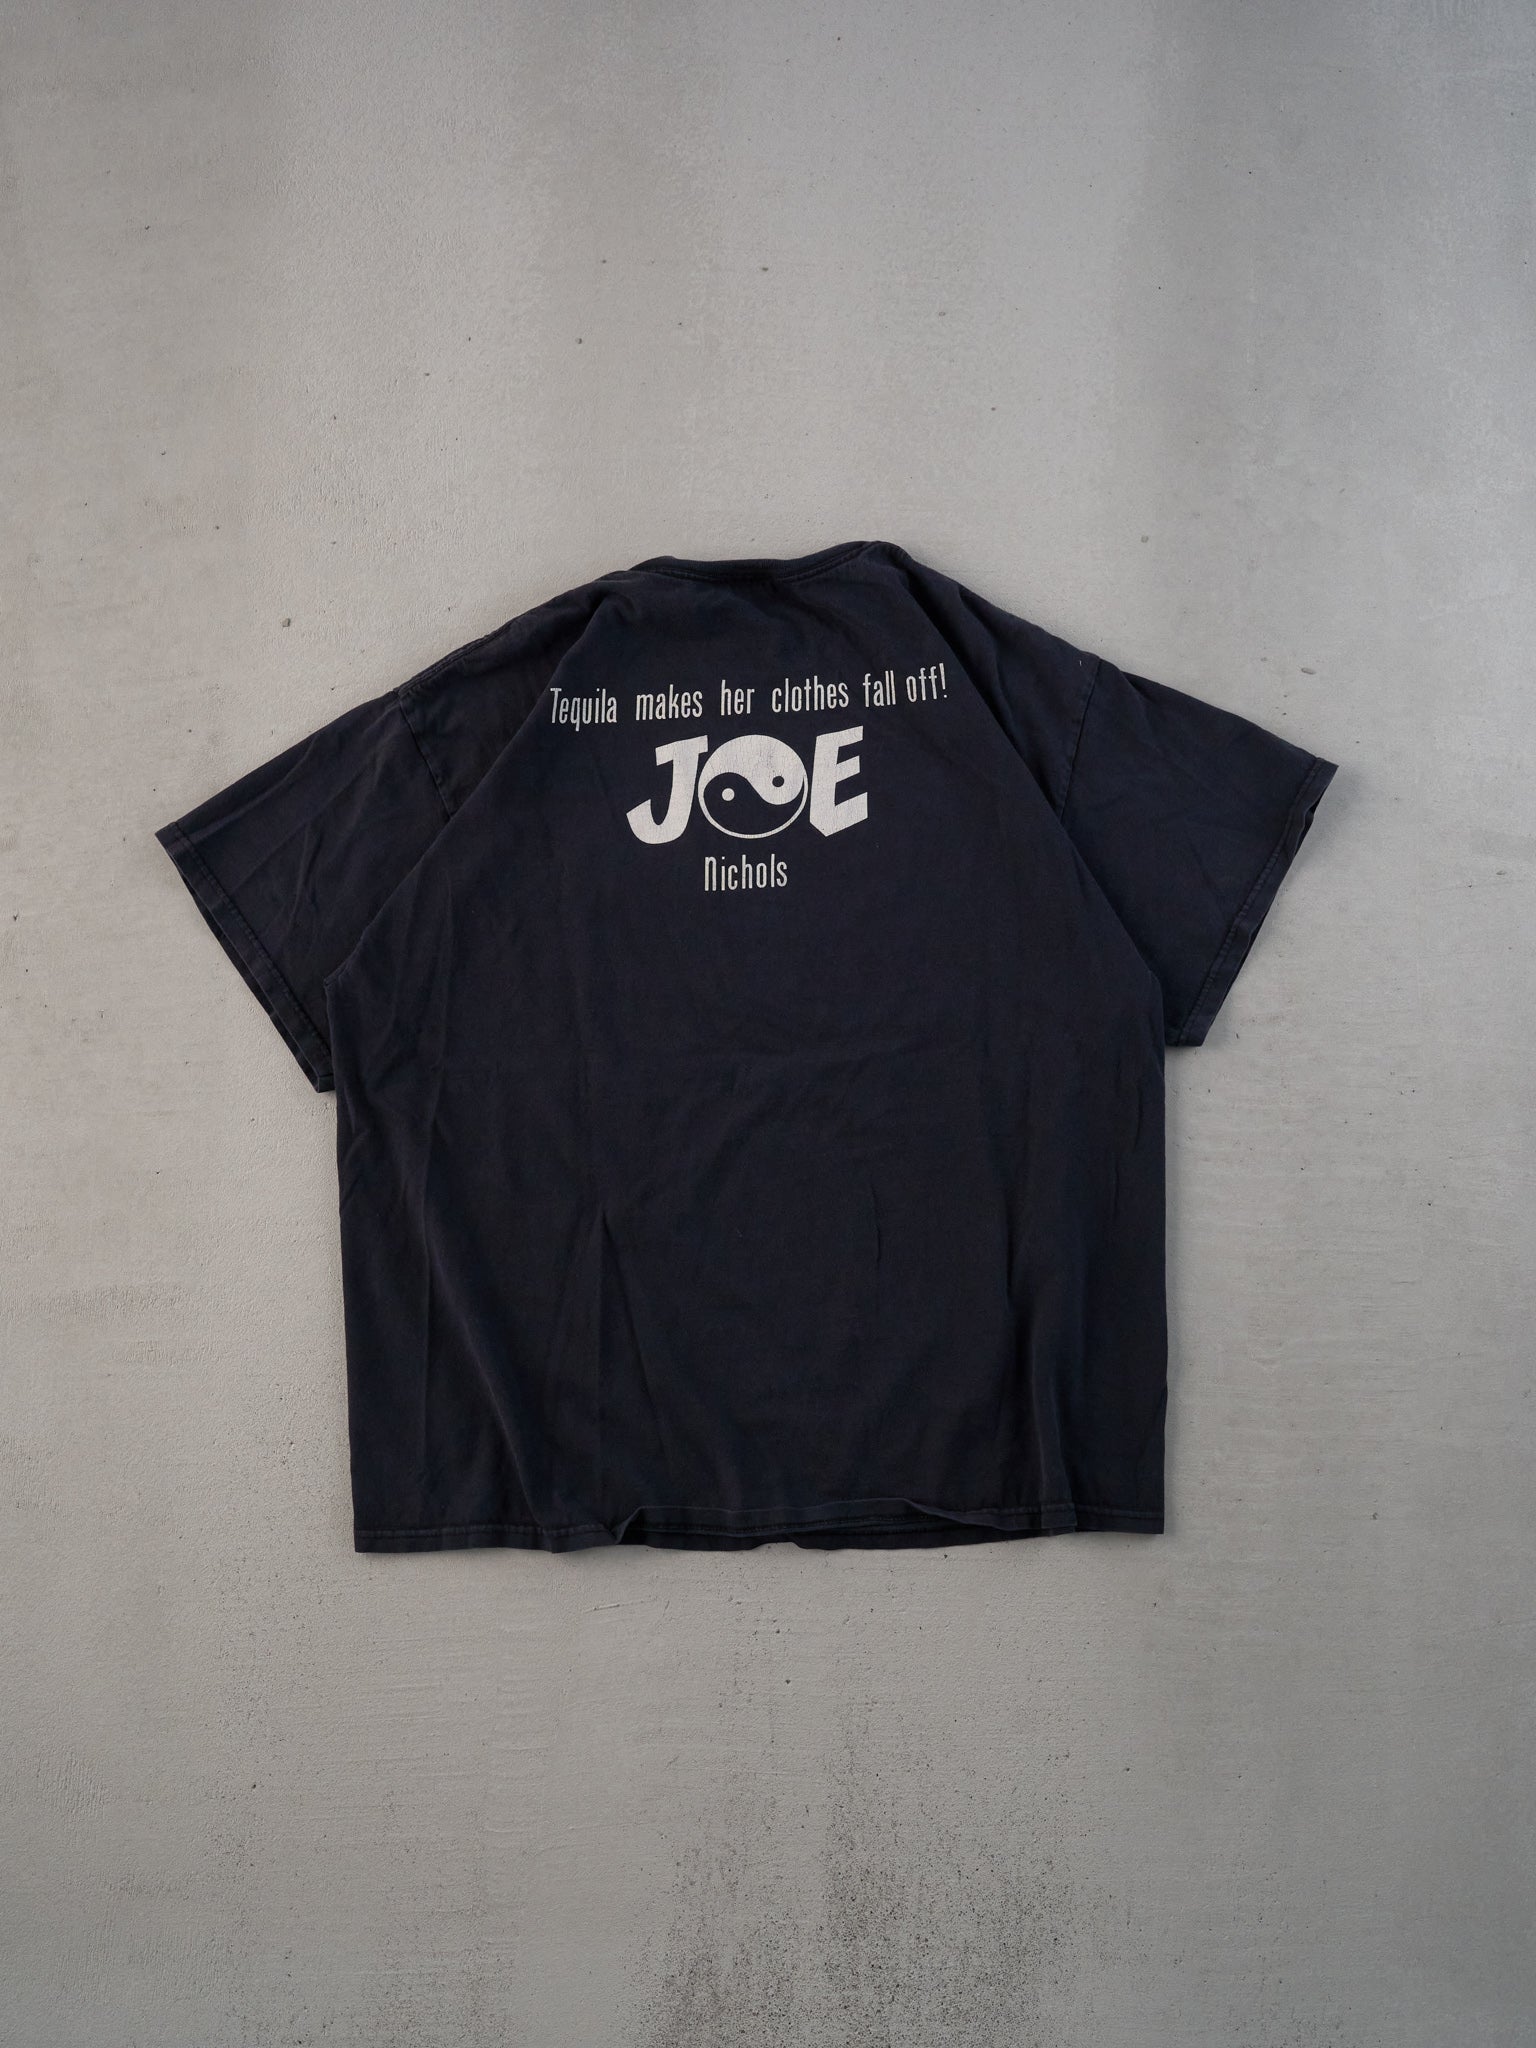 Vintage 90s Washed Black "got tequila?" Graphic Tee (M/L)